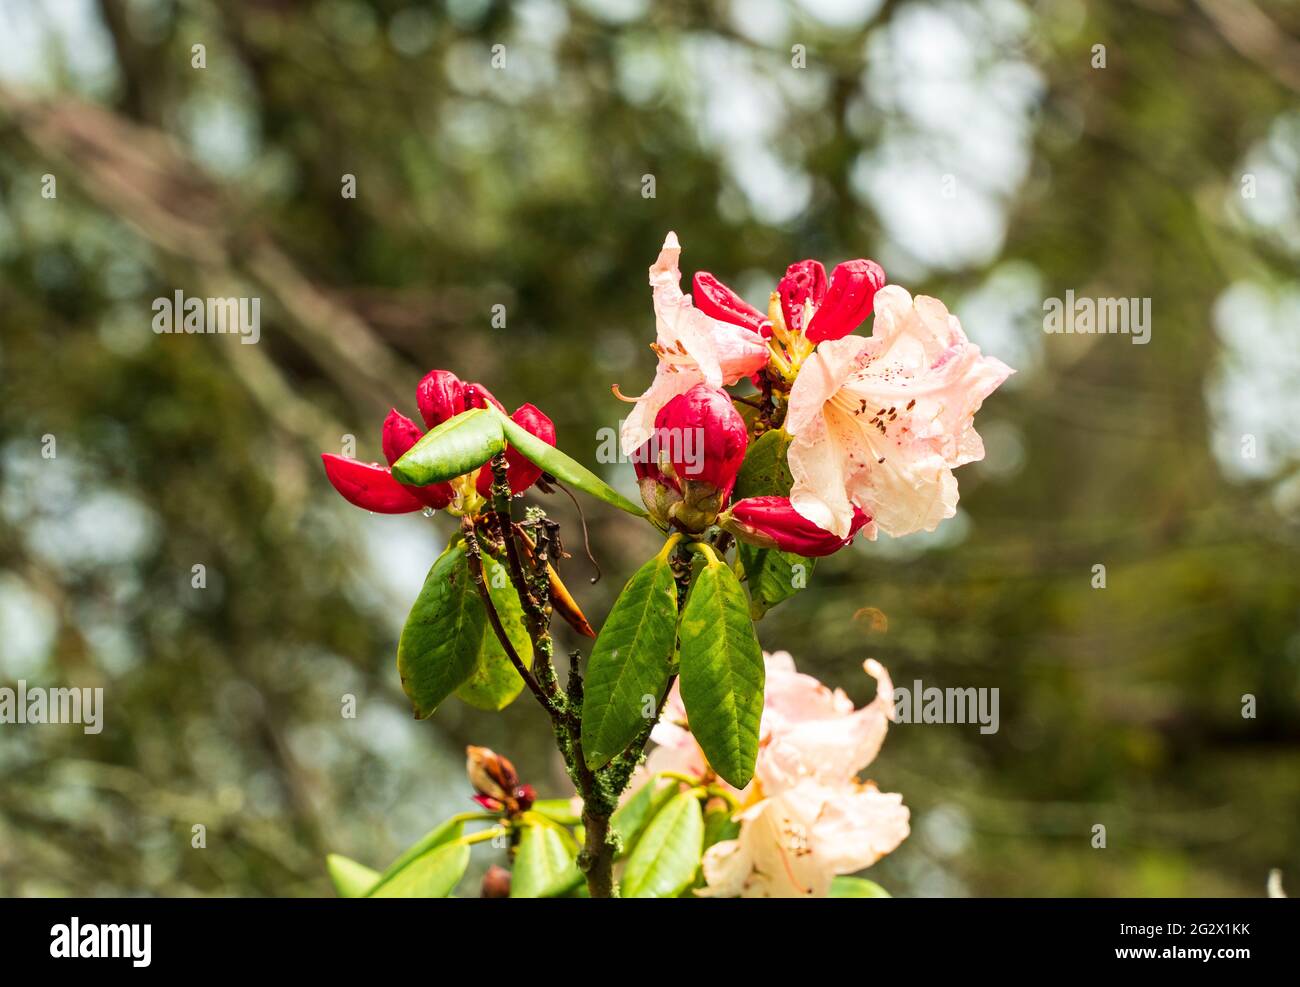 Rhododendron flower in spring Stock Photo